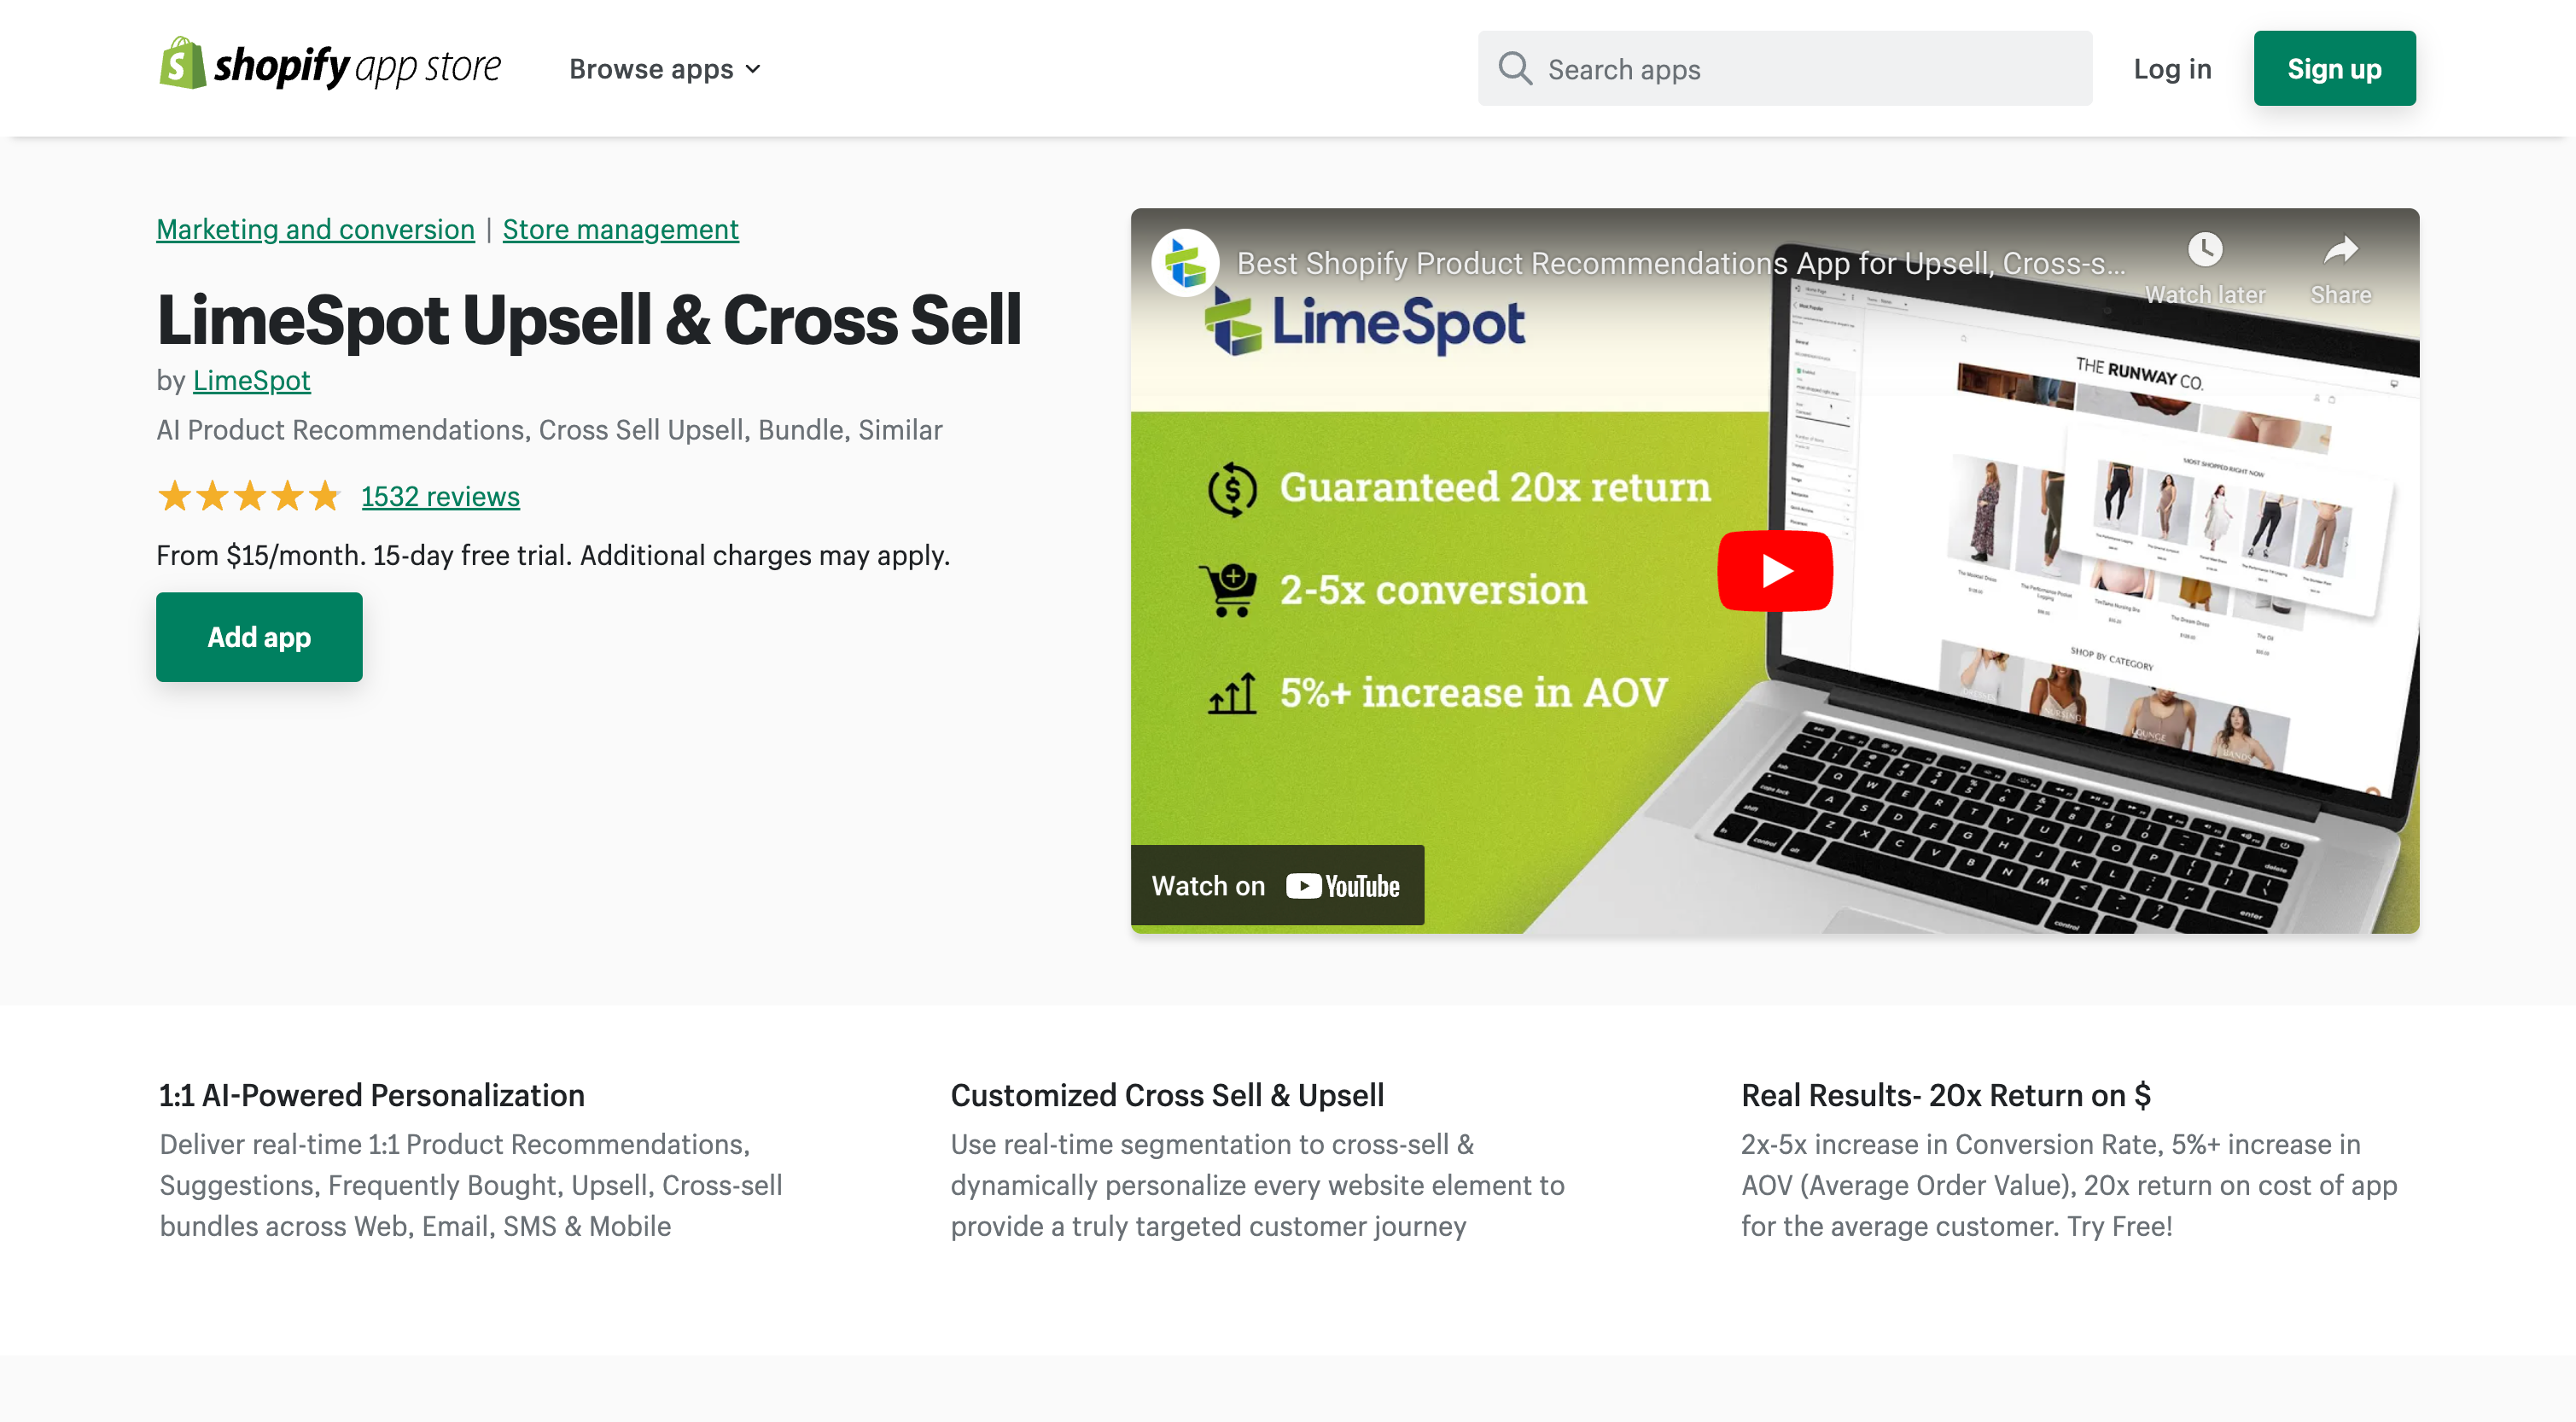 LimeSpot Upsell & Cross Sell - AI Product Recommendations, Cross Sell Upsell, Bundle, Similar | Shopify App Store